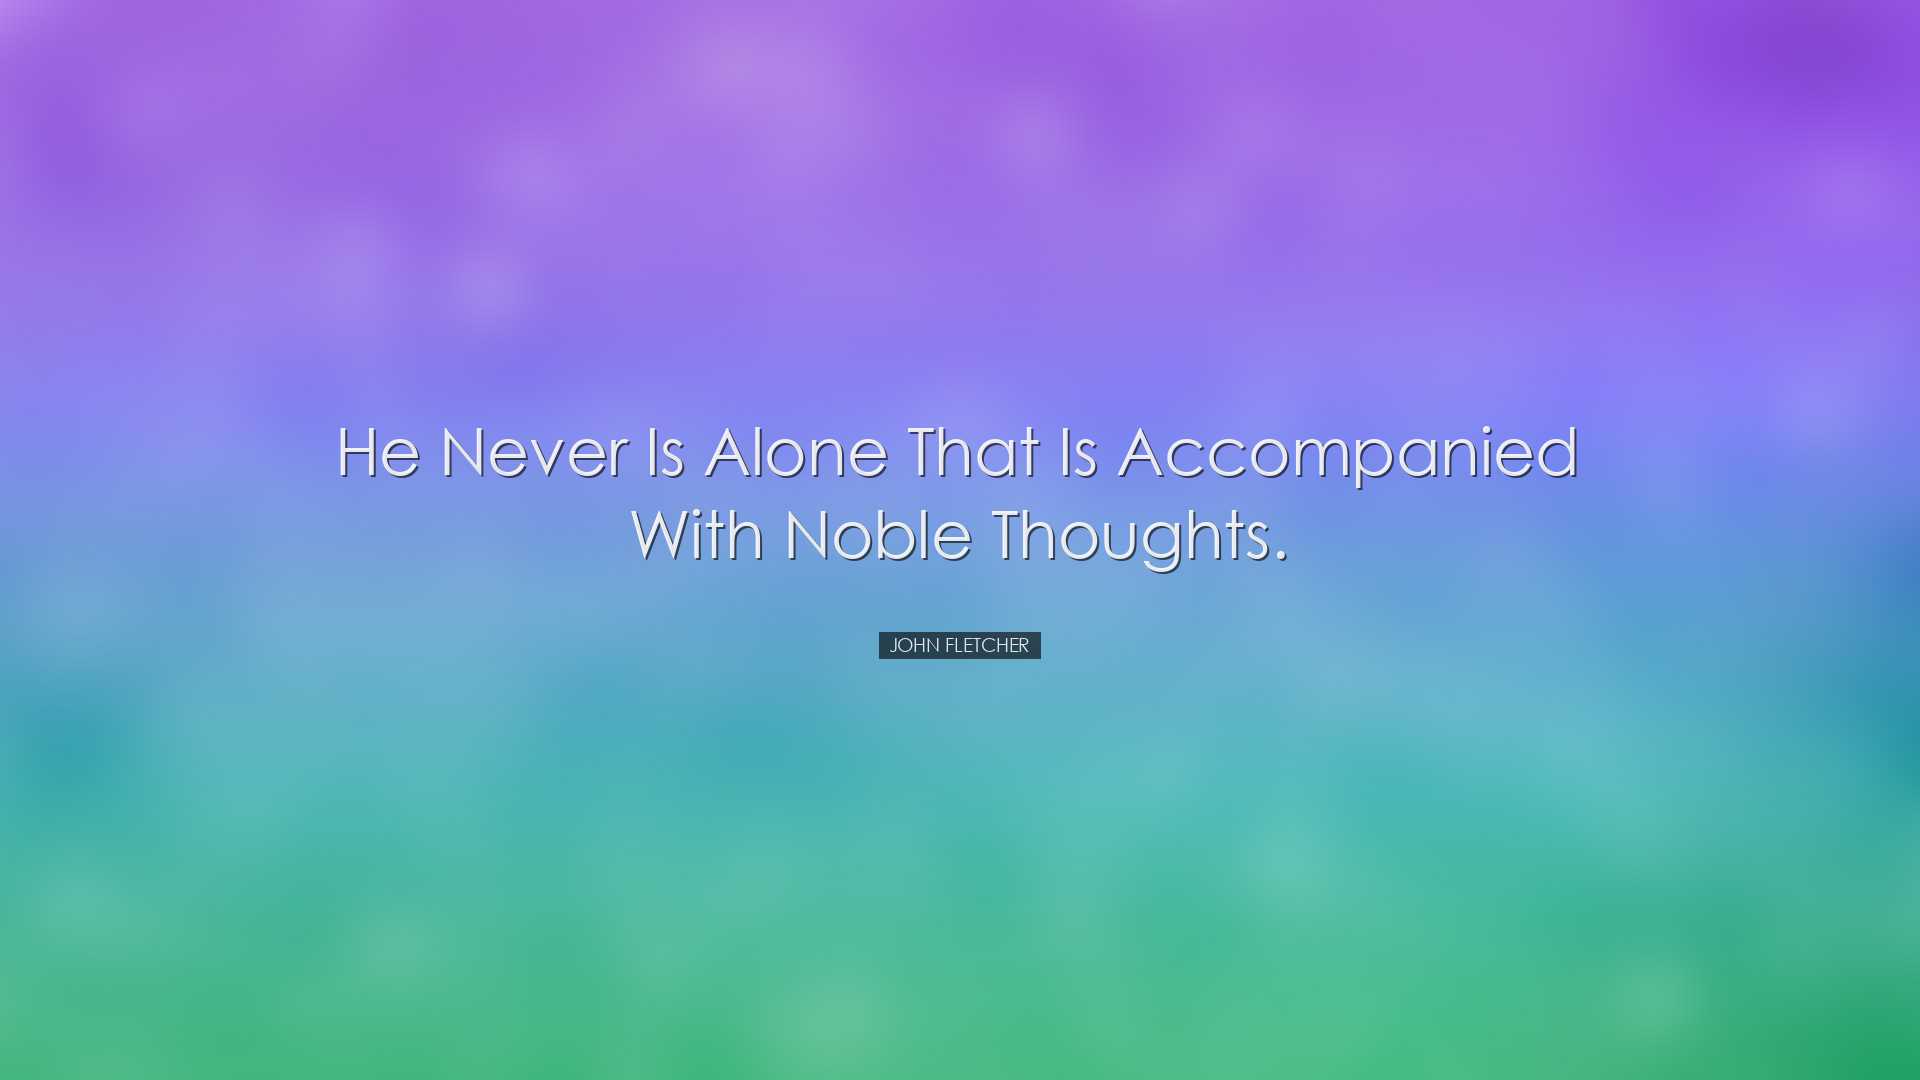 He never is alone that is accompanied with noble thoughts. - John